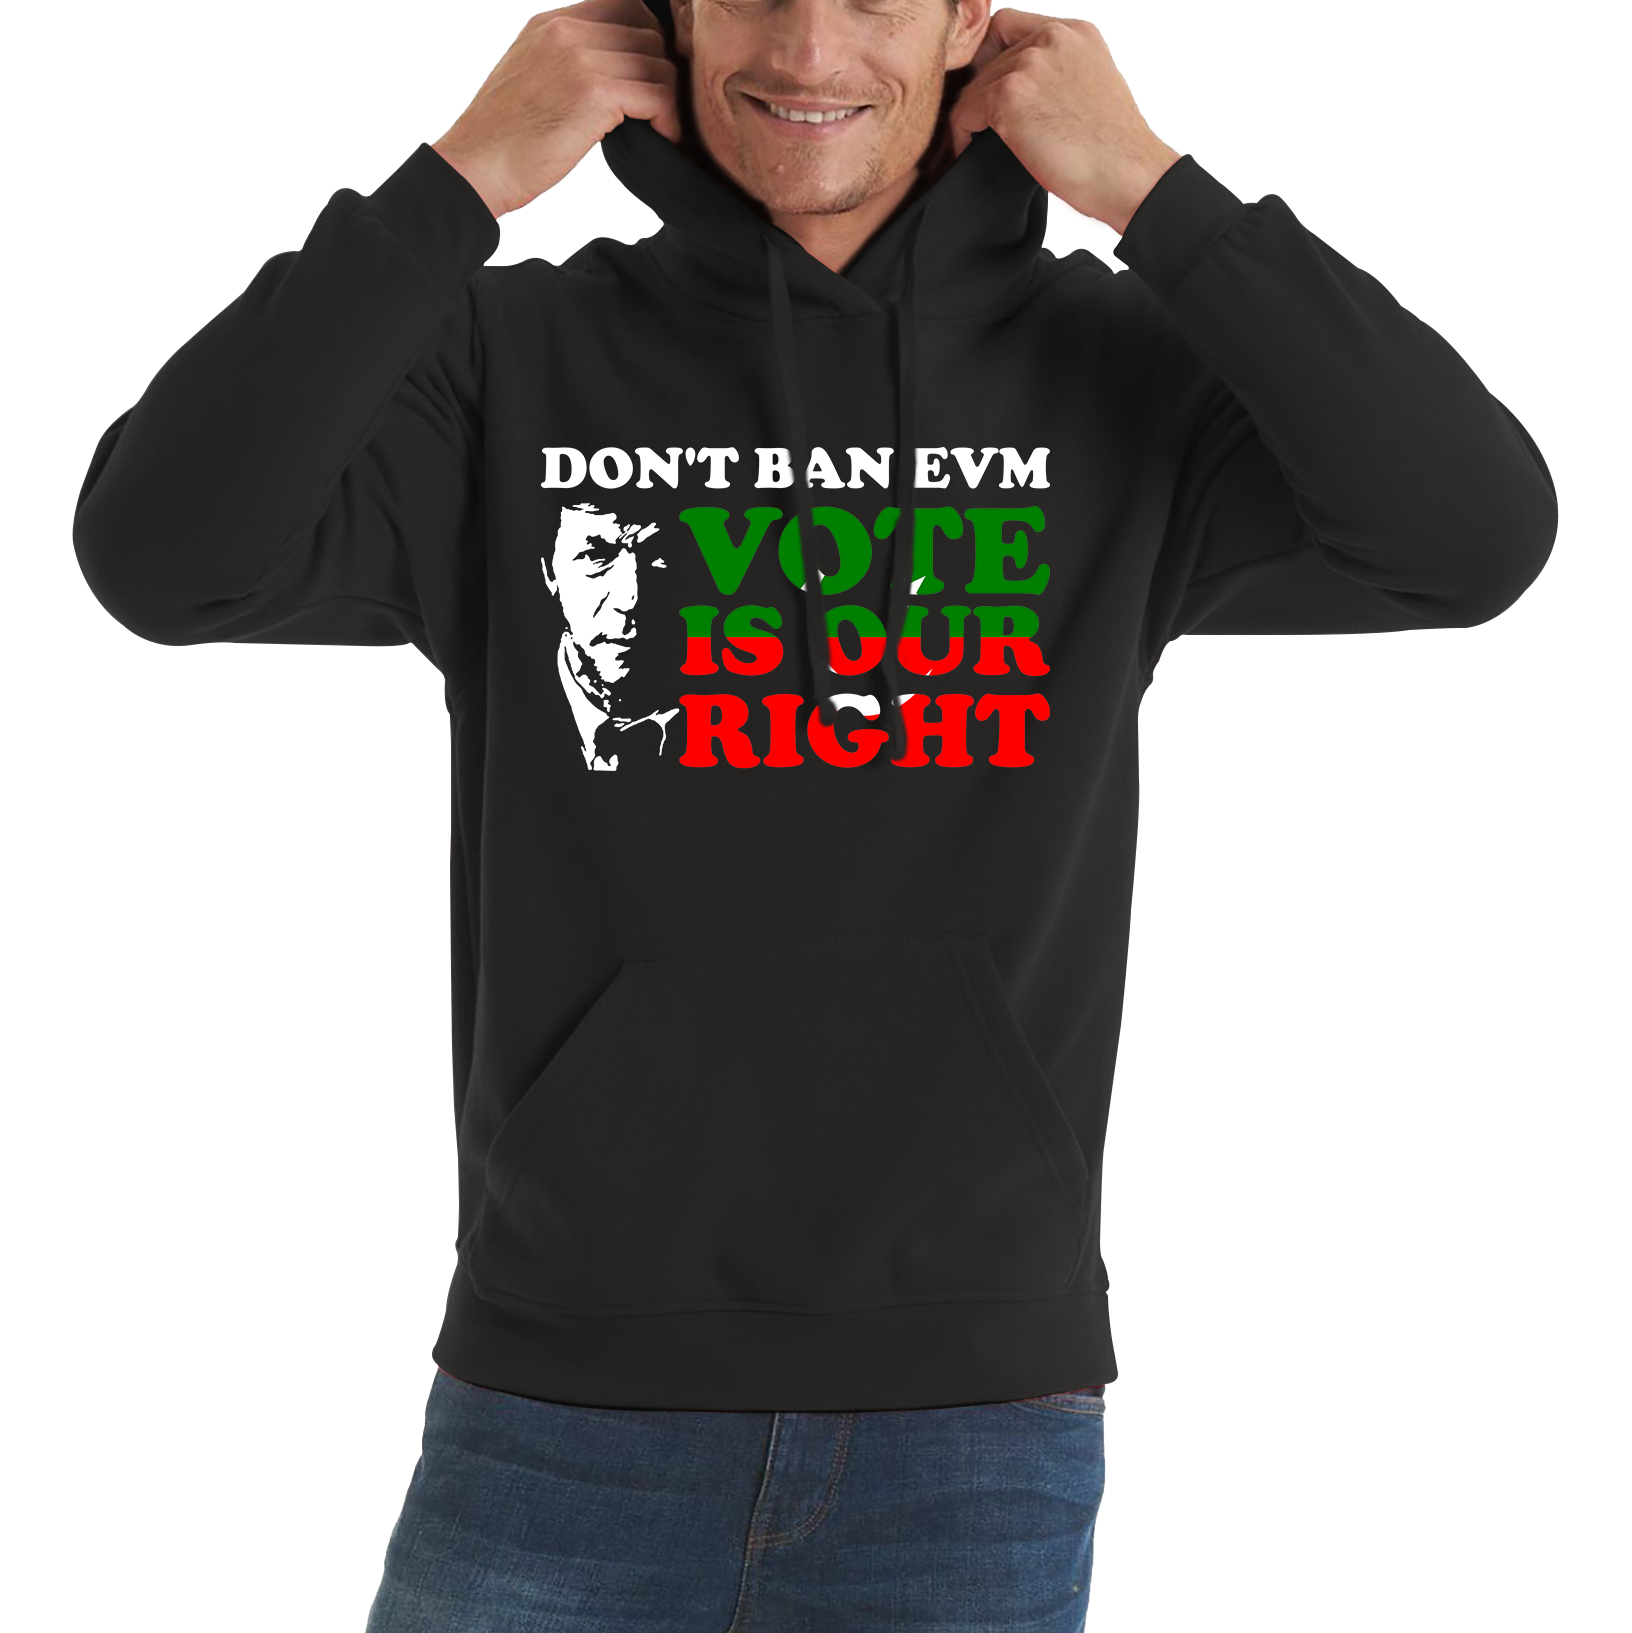 Don't Ban EVM Vote Is Our Right Imran Khan PTI Pakistani Politician Unisex Hoodie